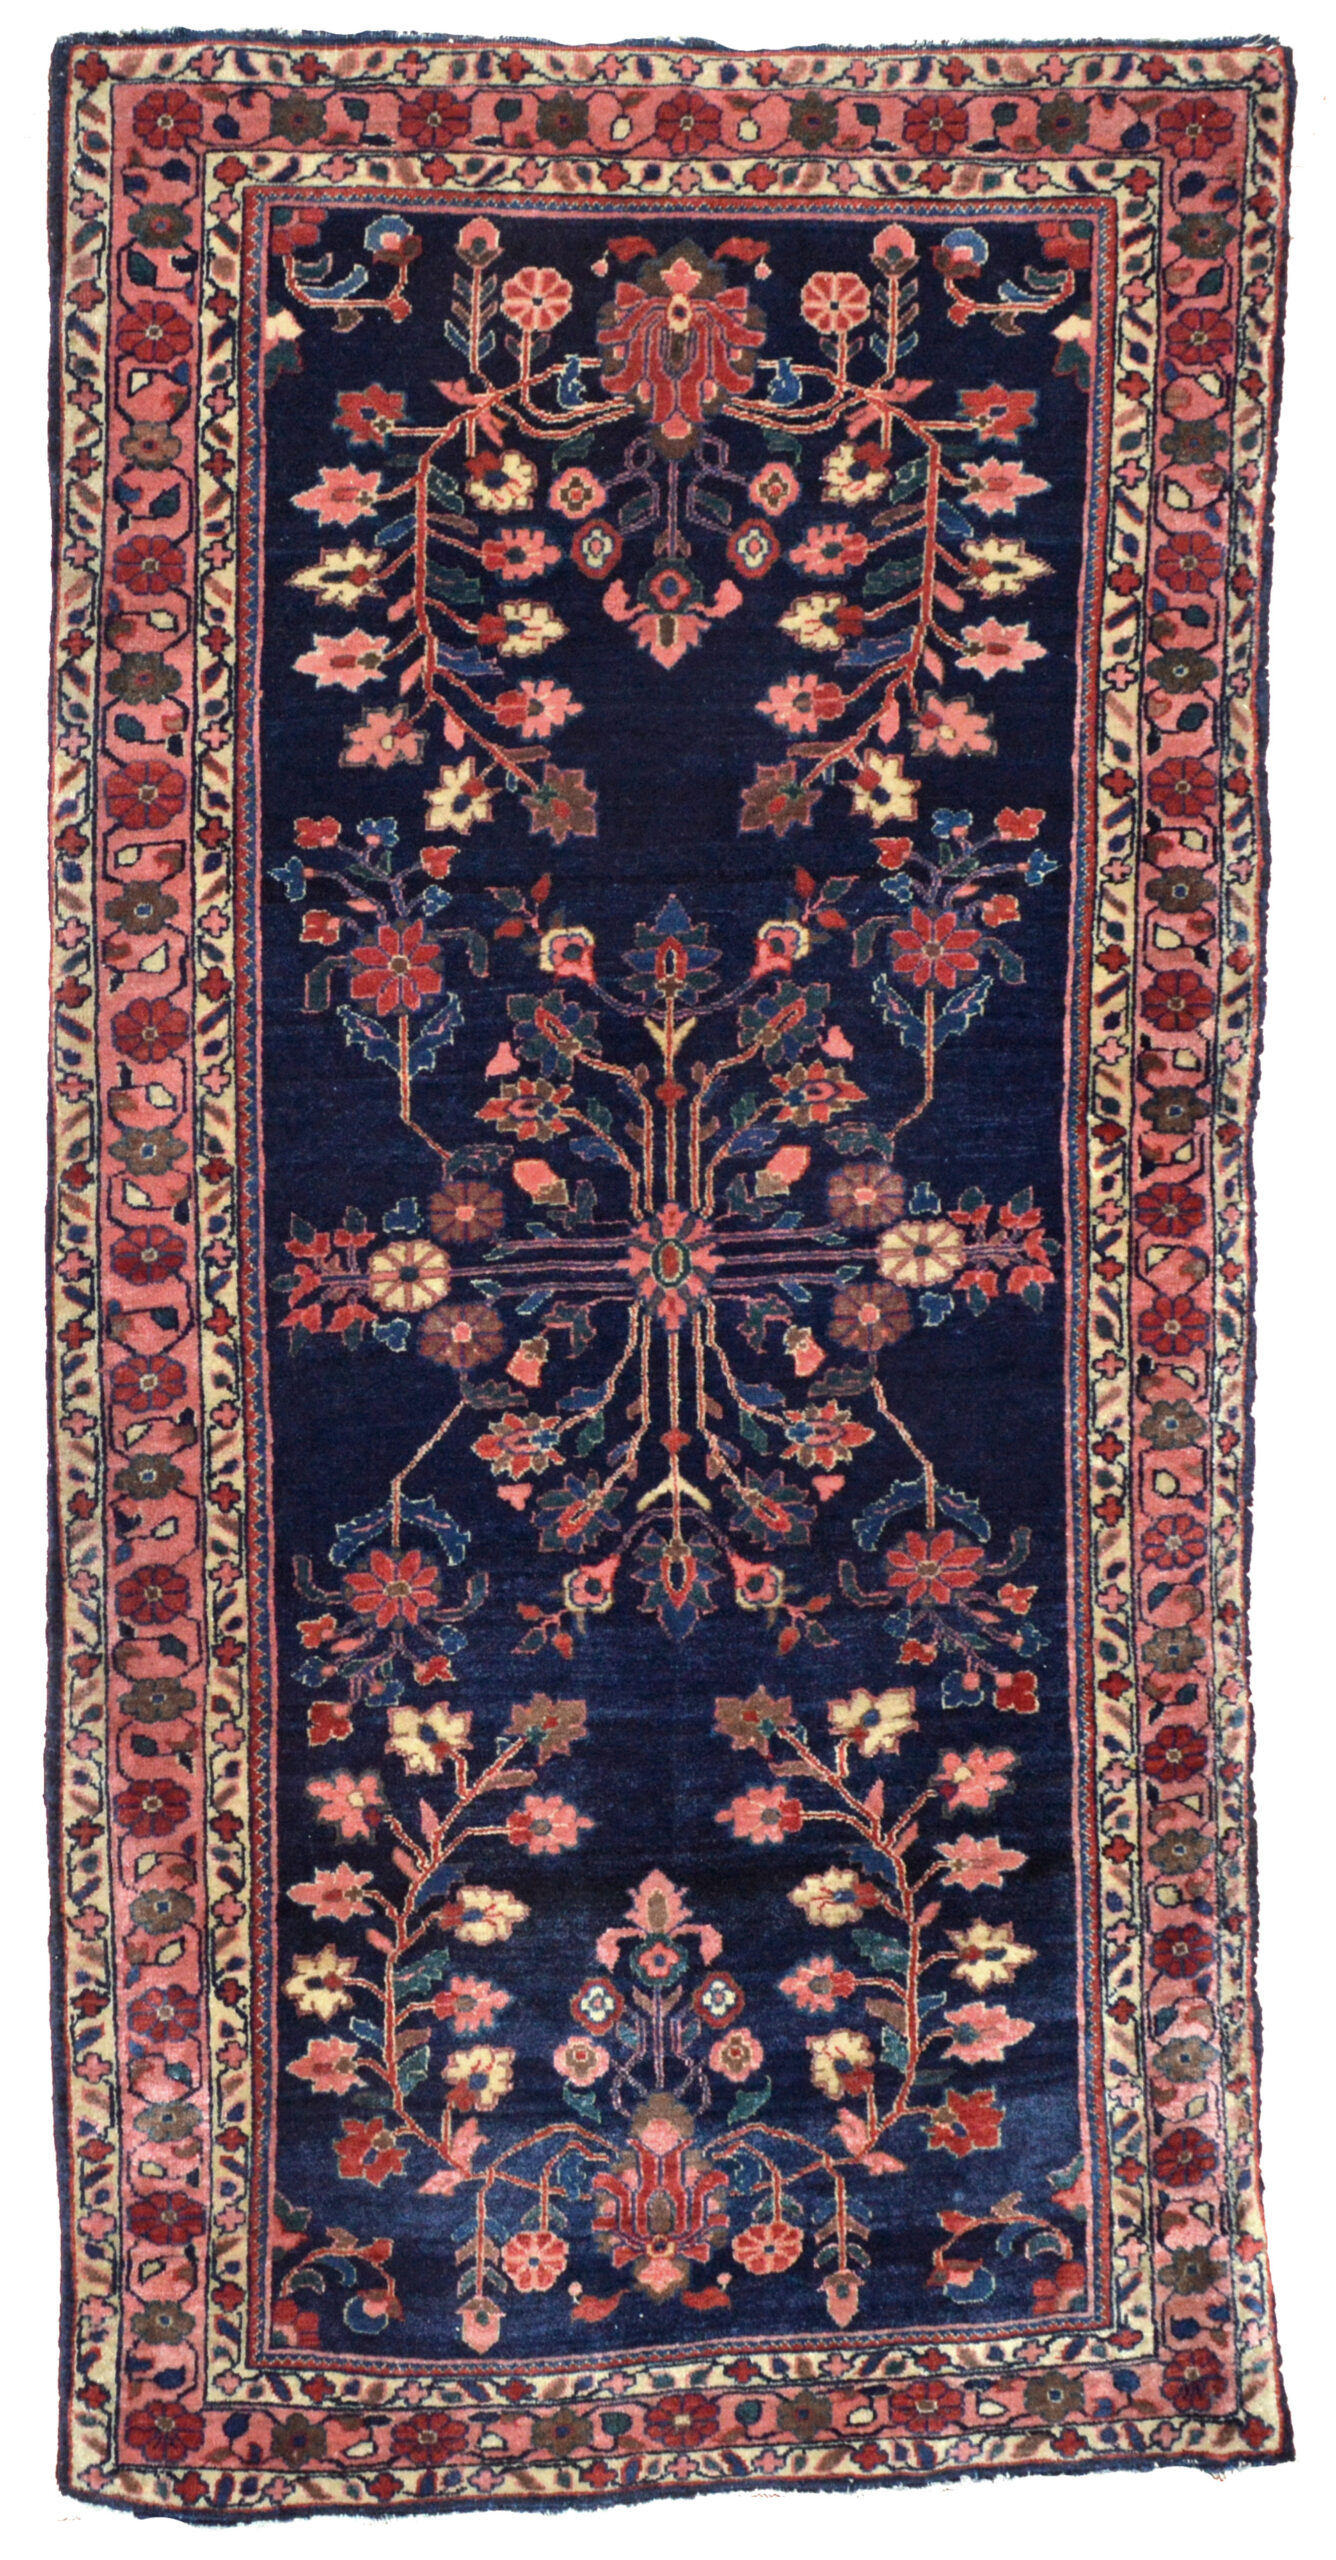 A finely woven antique Mahajaran Sarouk from central Persia's Sultanabad province, circa 1915. The navy field is decorated with floral forms and framed by a coral color border with ivory guard borders. Douglas Stock Gallery, antique Persian rugs Boston,MA area New England